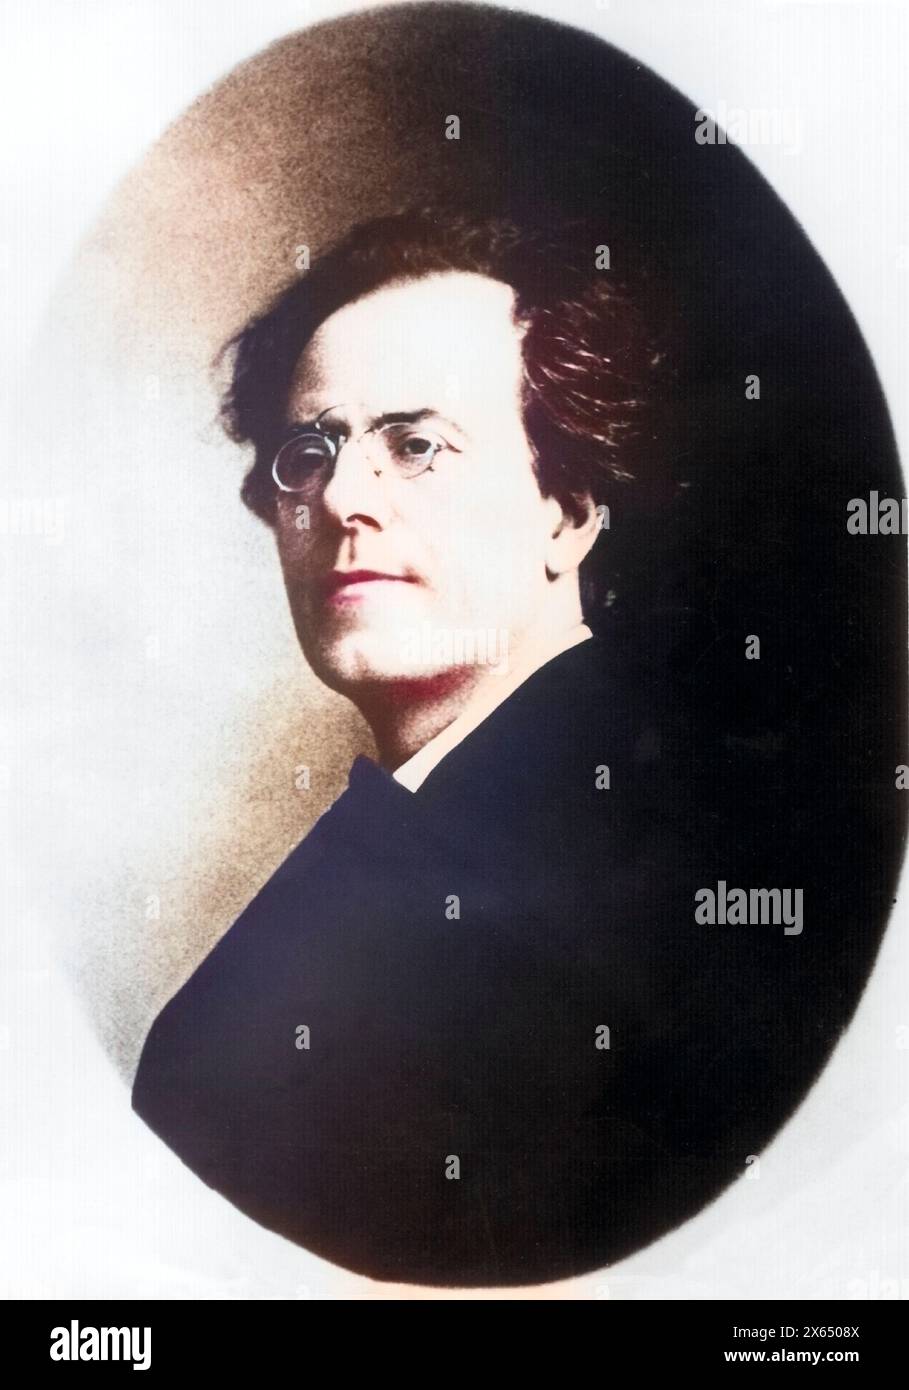 Mahler, Gustav, 7.7.1860 - 18.5.1911, Austrian musician (composer, conductor), portrait in oval, ADDITIONAL-RIGHTS-CLEARANCE-INFO-NOT-AVAILABLE Stock Photo